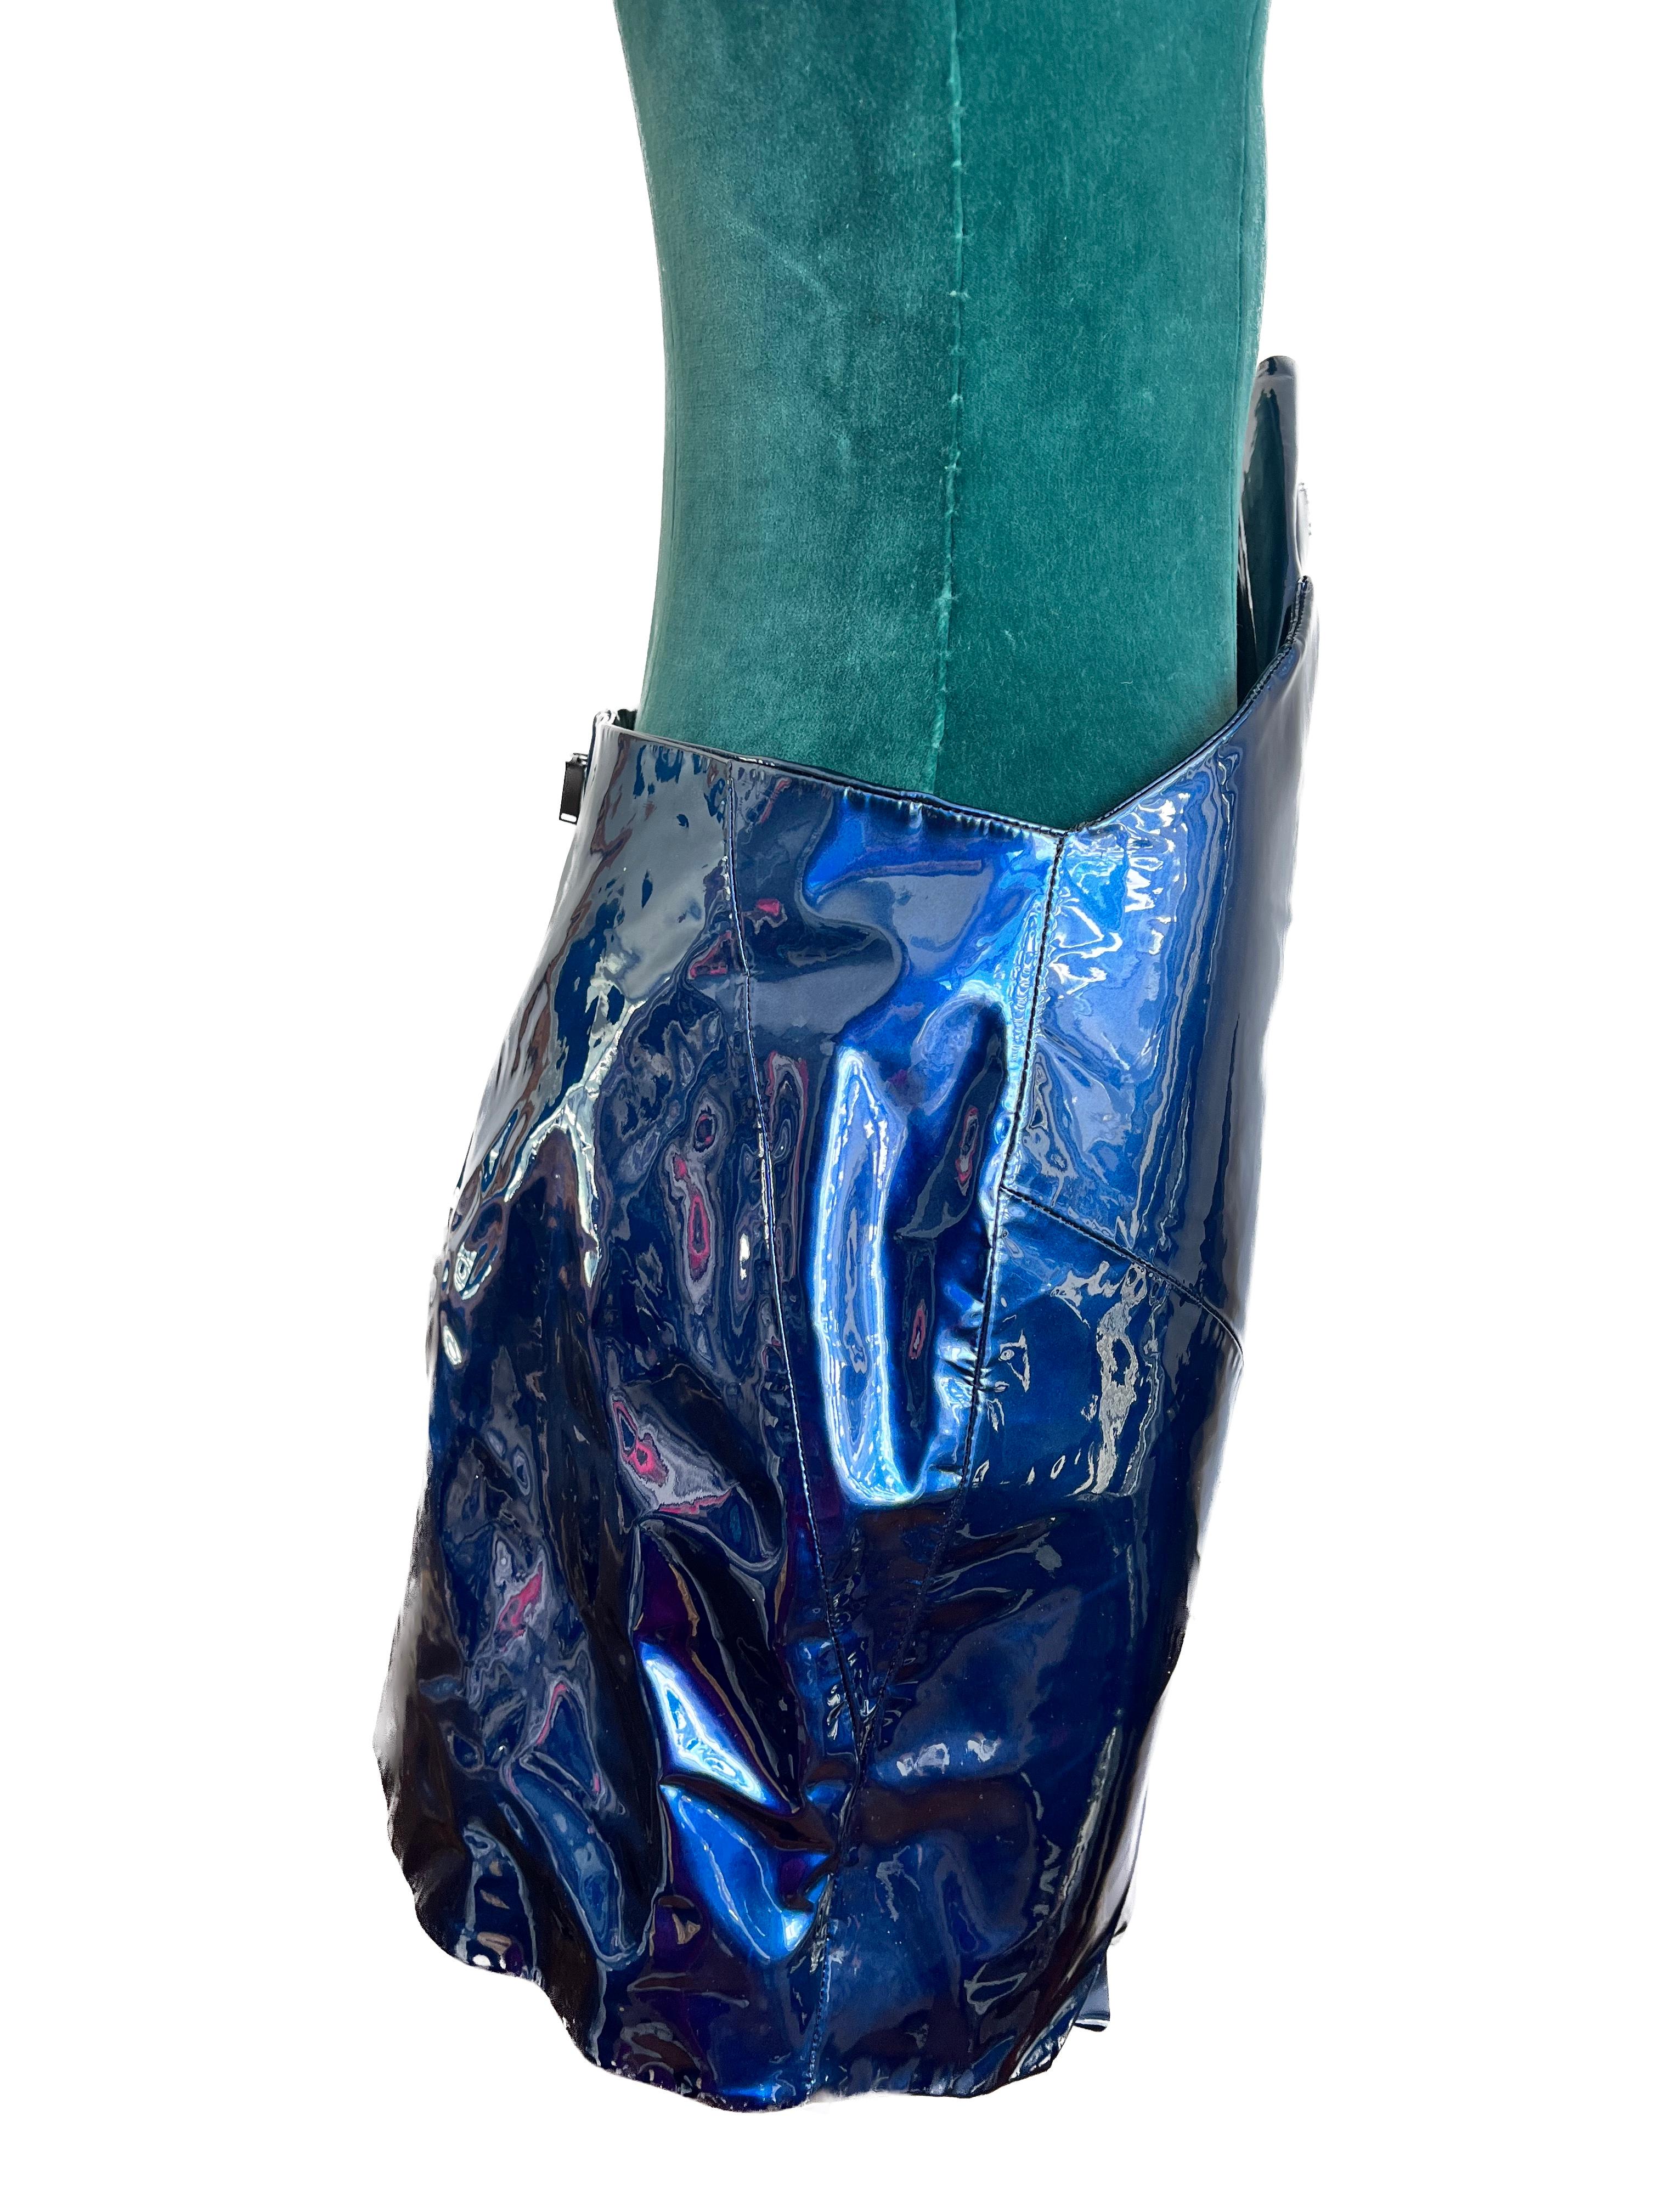 It seems you're describing a specific fashion item, a 2017 blue patent mini leather skirt with ruffle detail, brand new with tags, and in size F40. Here's how you might highlight the features of this stylish piece:

Material and Finish:
Crafted from